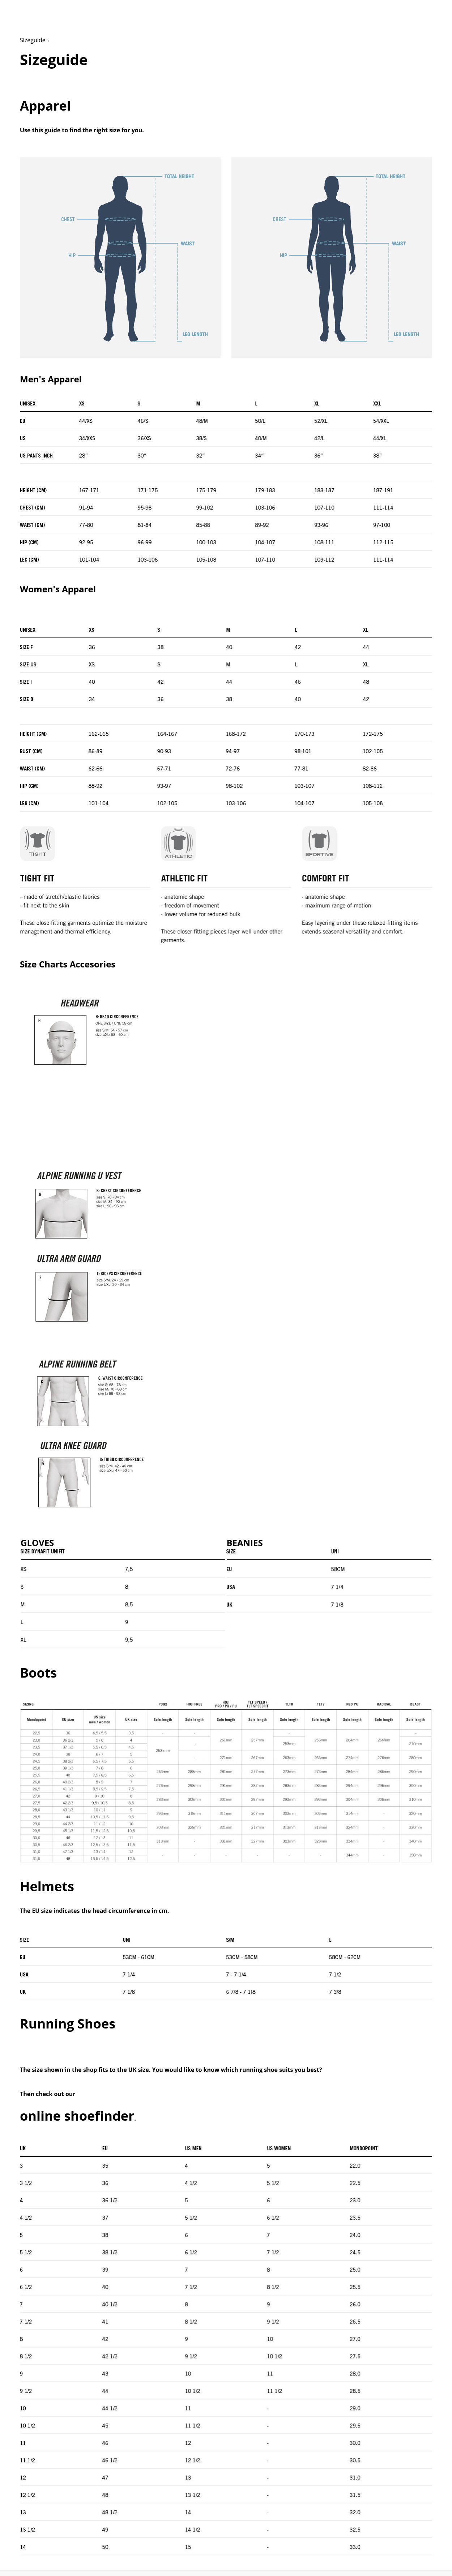 dynafit_size_chart_size_guide_fit_guide